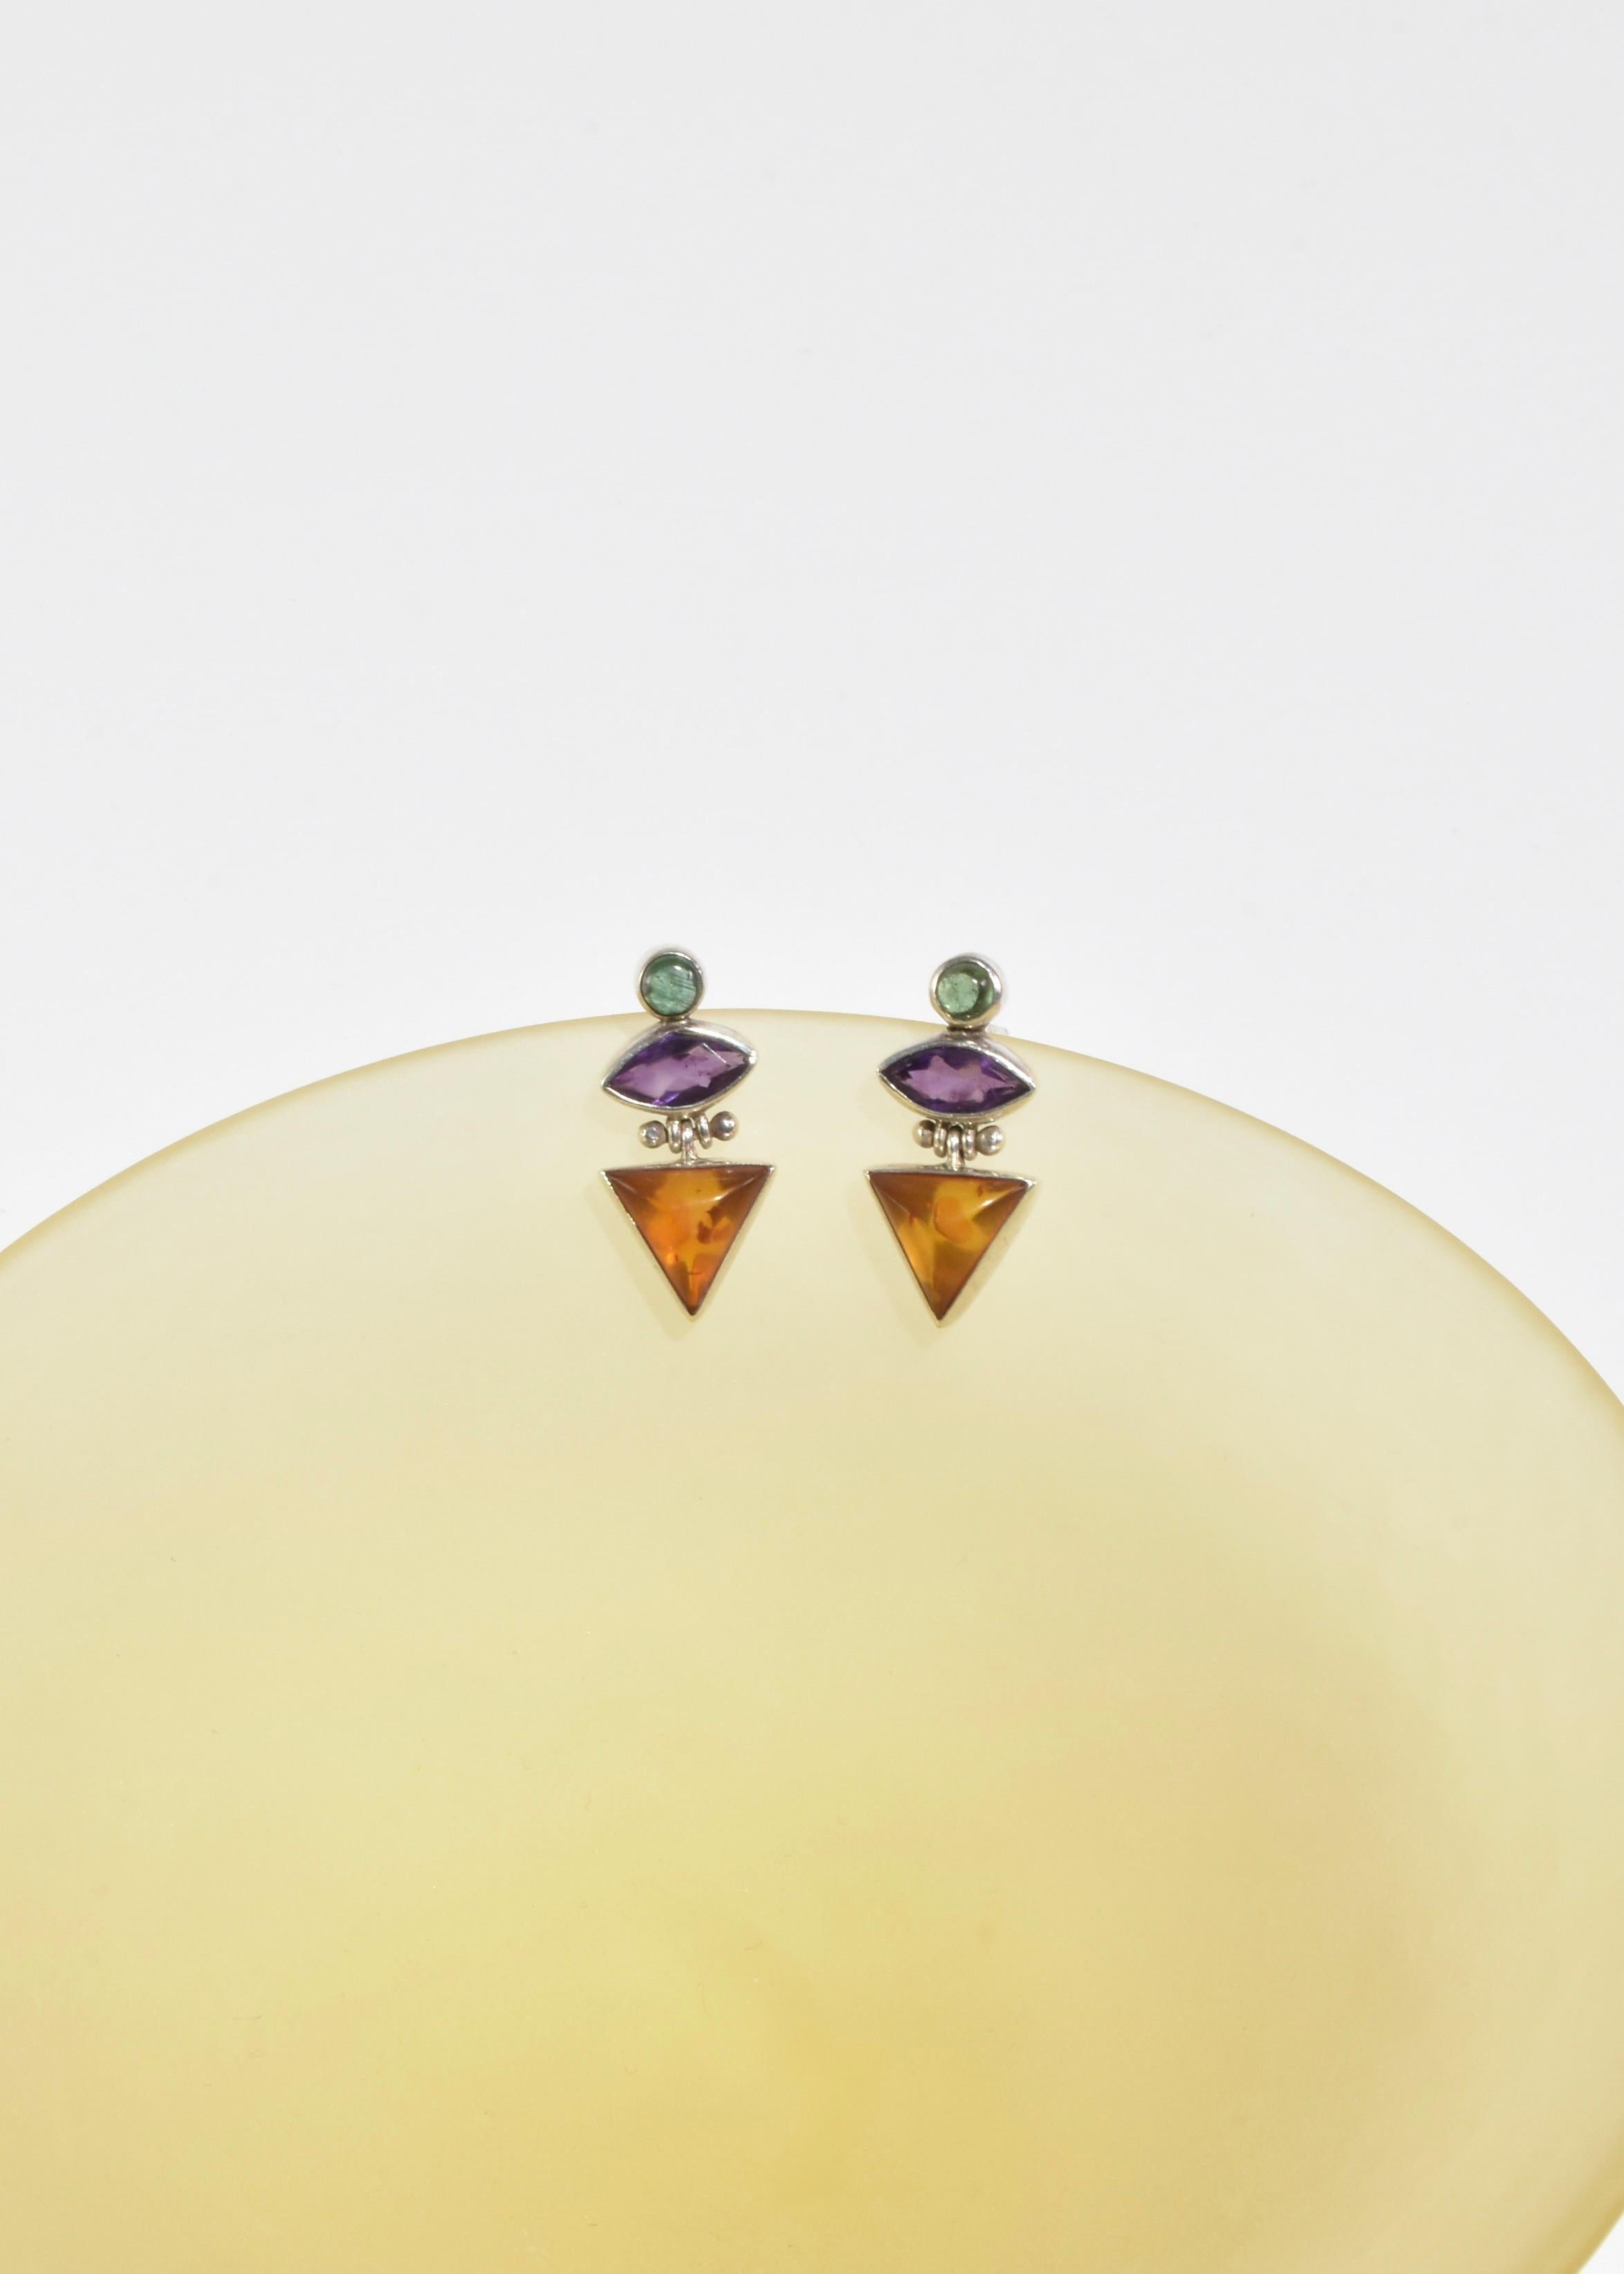 Vintage silver earrings with geometric amber, amethyst, and peridot stones, pierced. Stamped 925.

Material: Sterling silver, amber, amethyst, peridot.